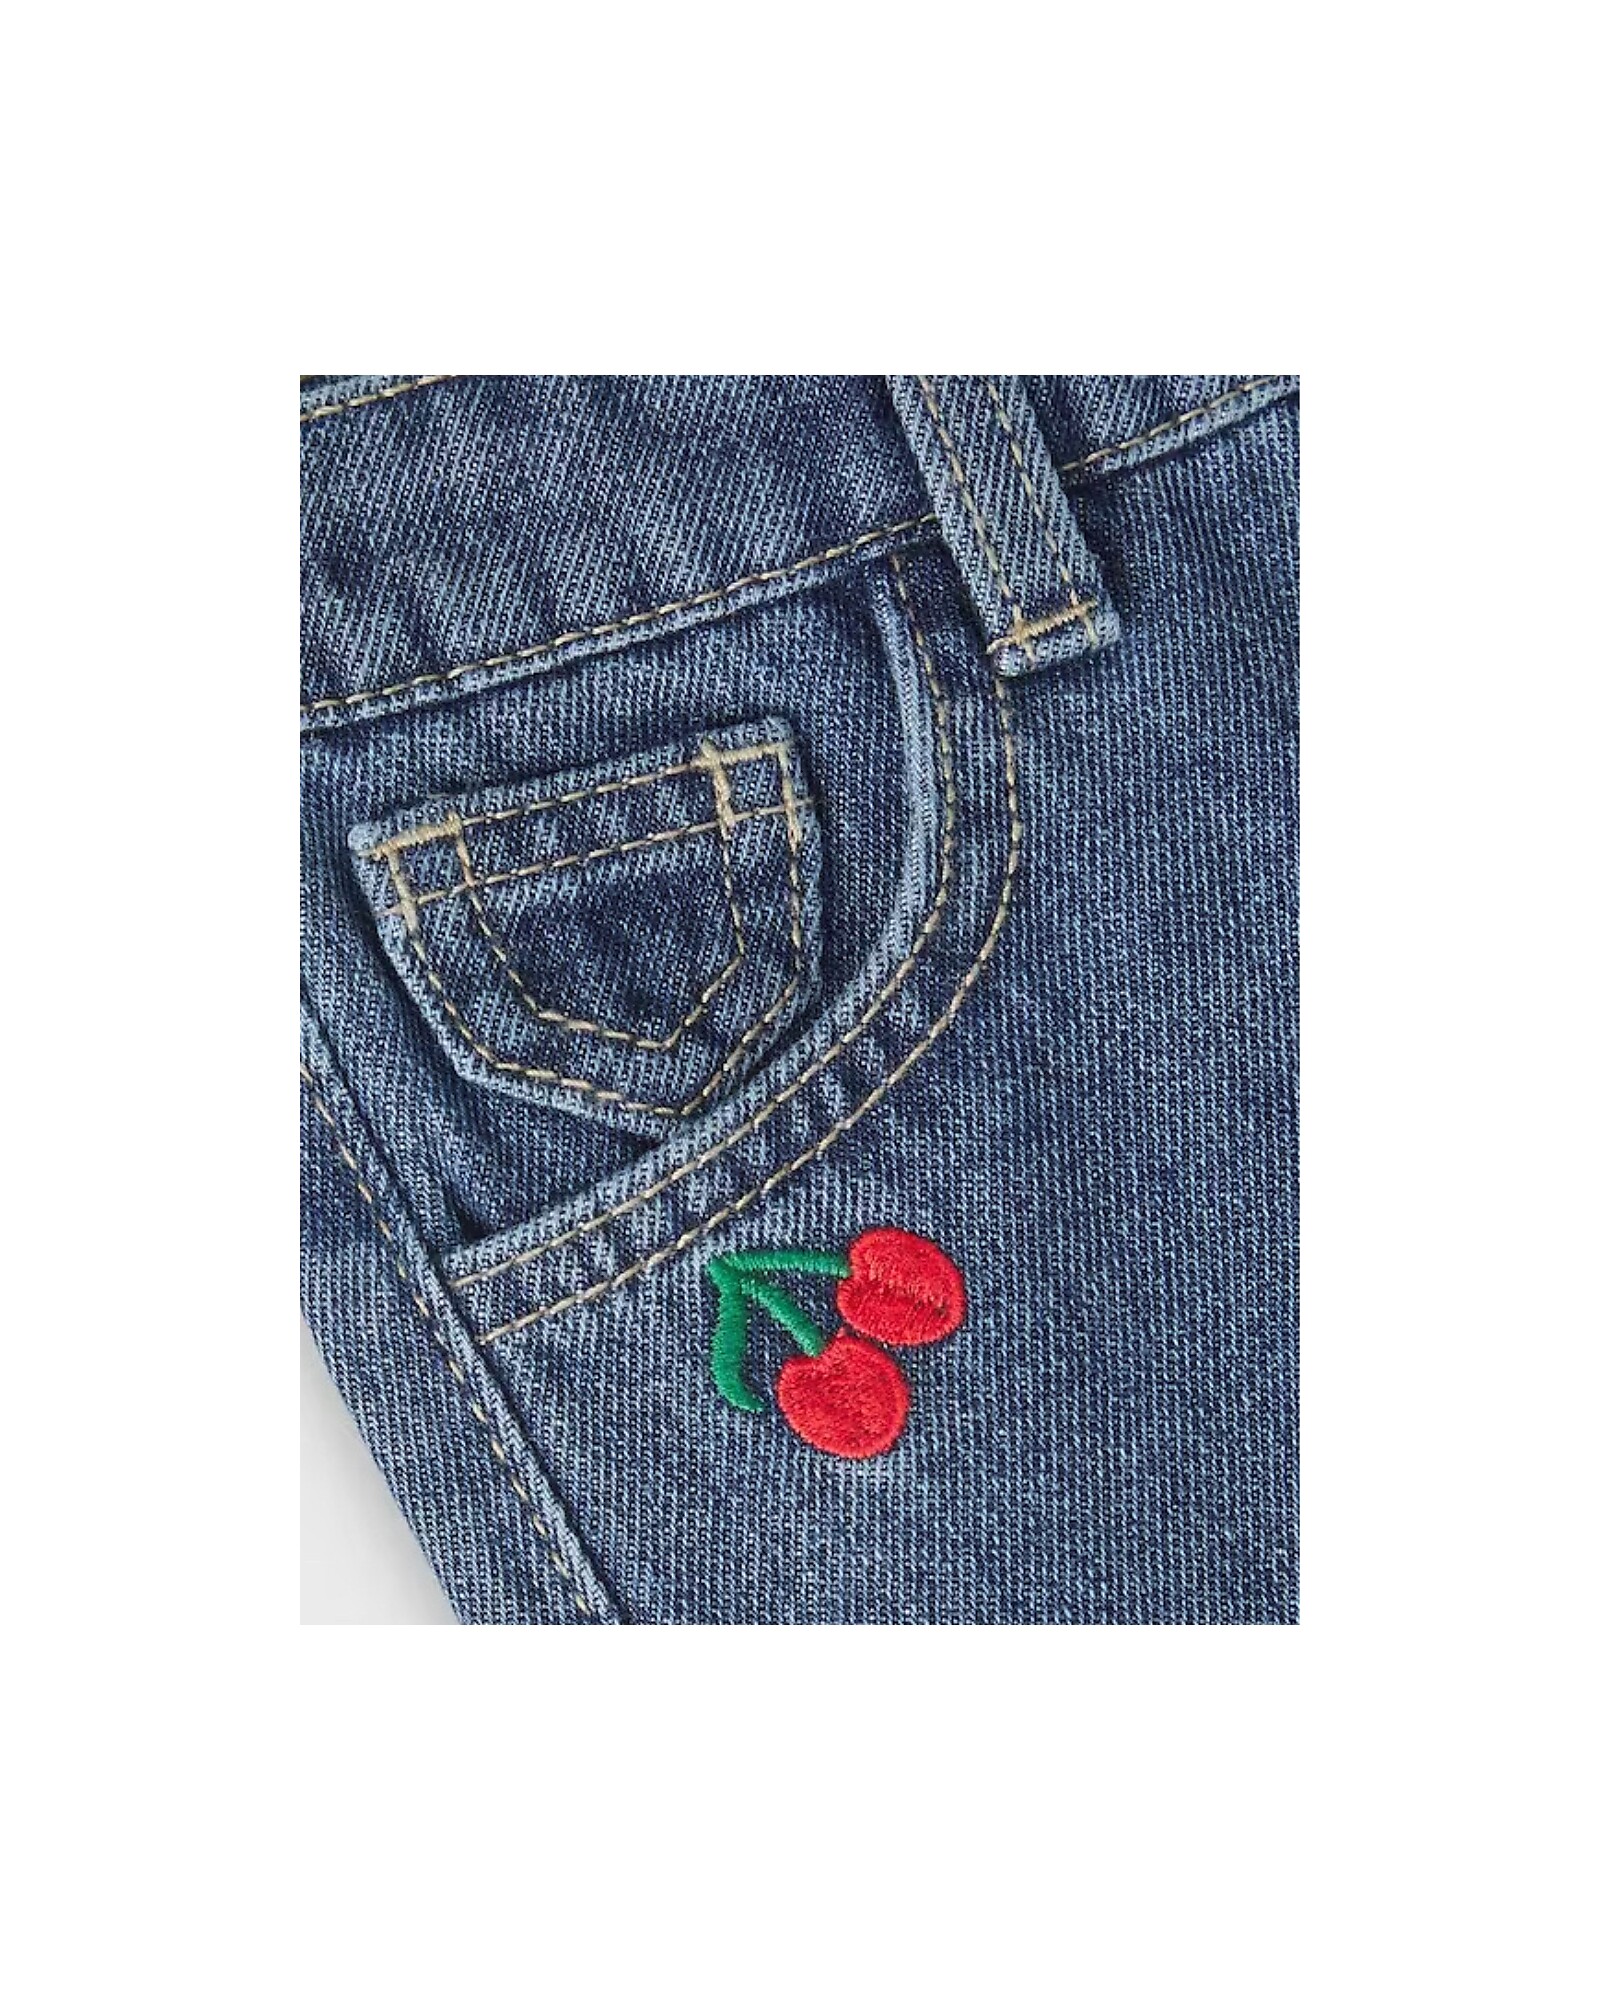 Name Jeans - Dark Blue Denim - Cherries - with Snap Button unisex (bambini)